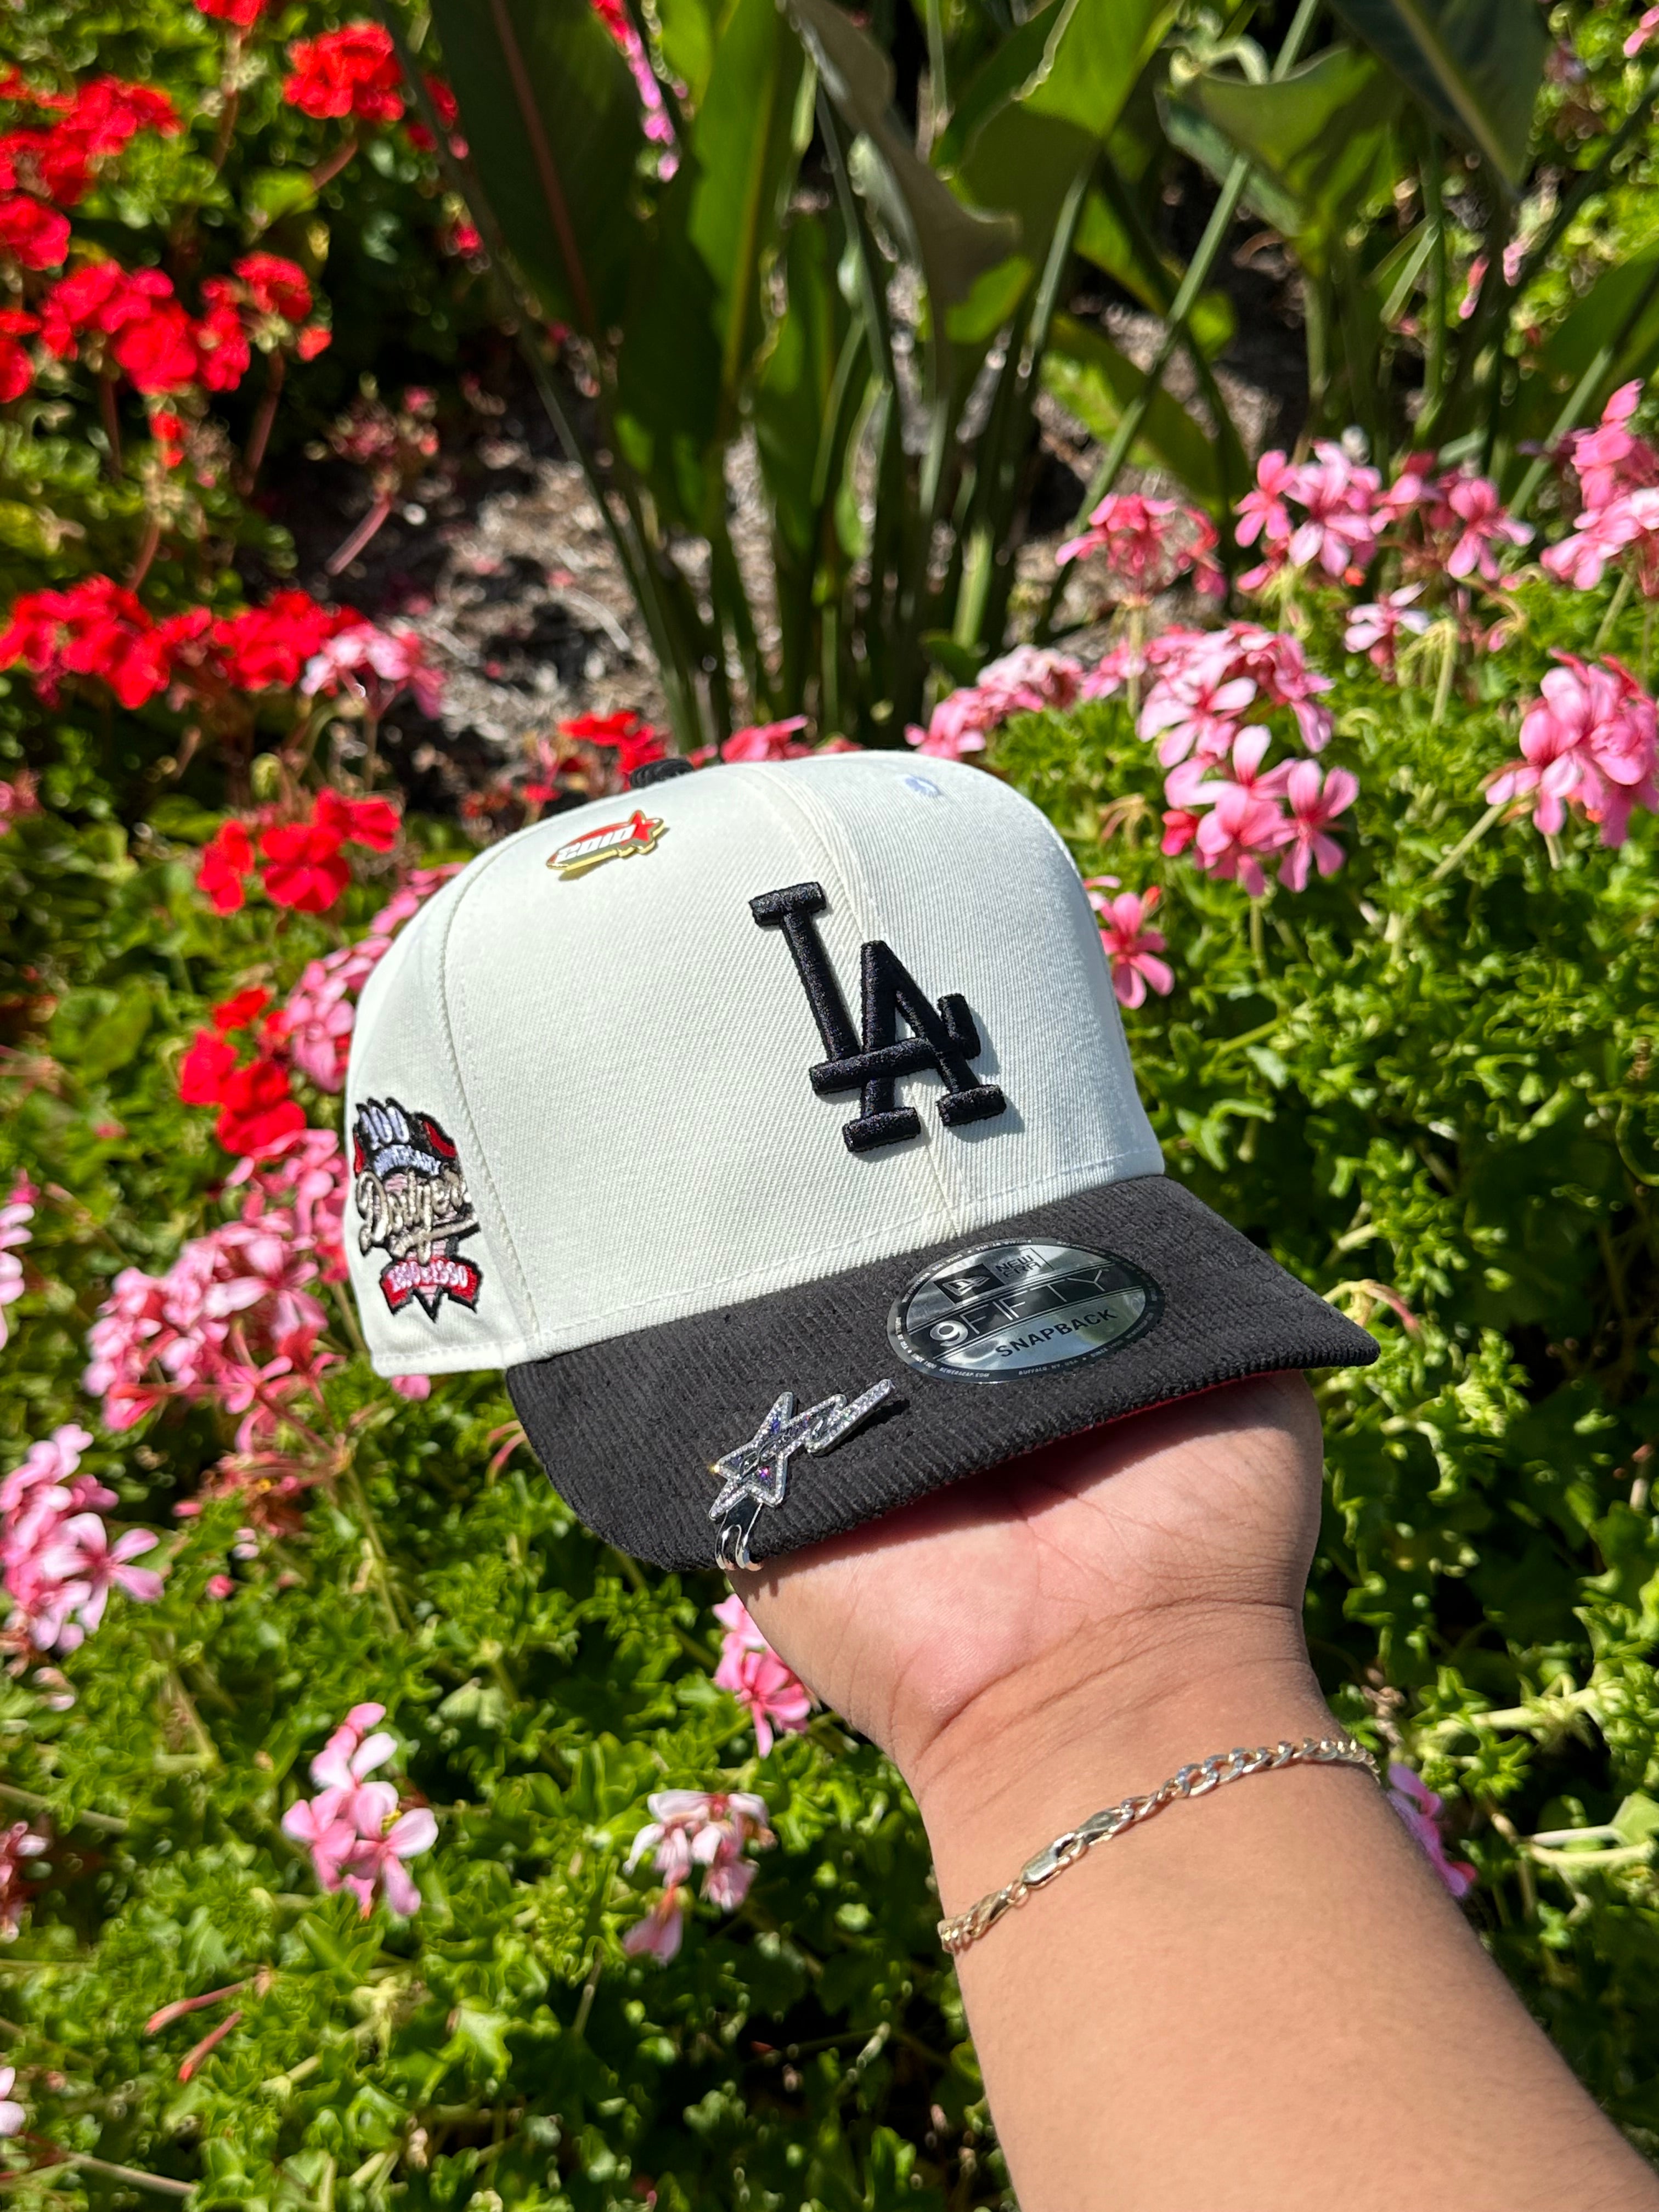 NEW ERA EXCLUSIVE 9FIFTY CHROME WHITE/CORUROY LOS ANGELES DODGERS SNAPBACK W/ 100TH ANNIVERSARY PATCH